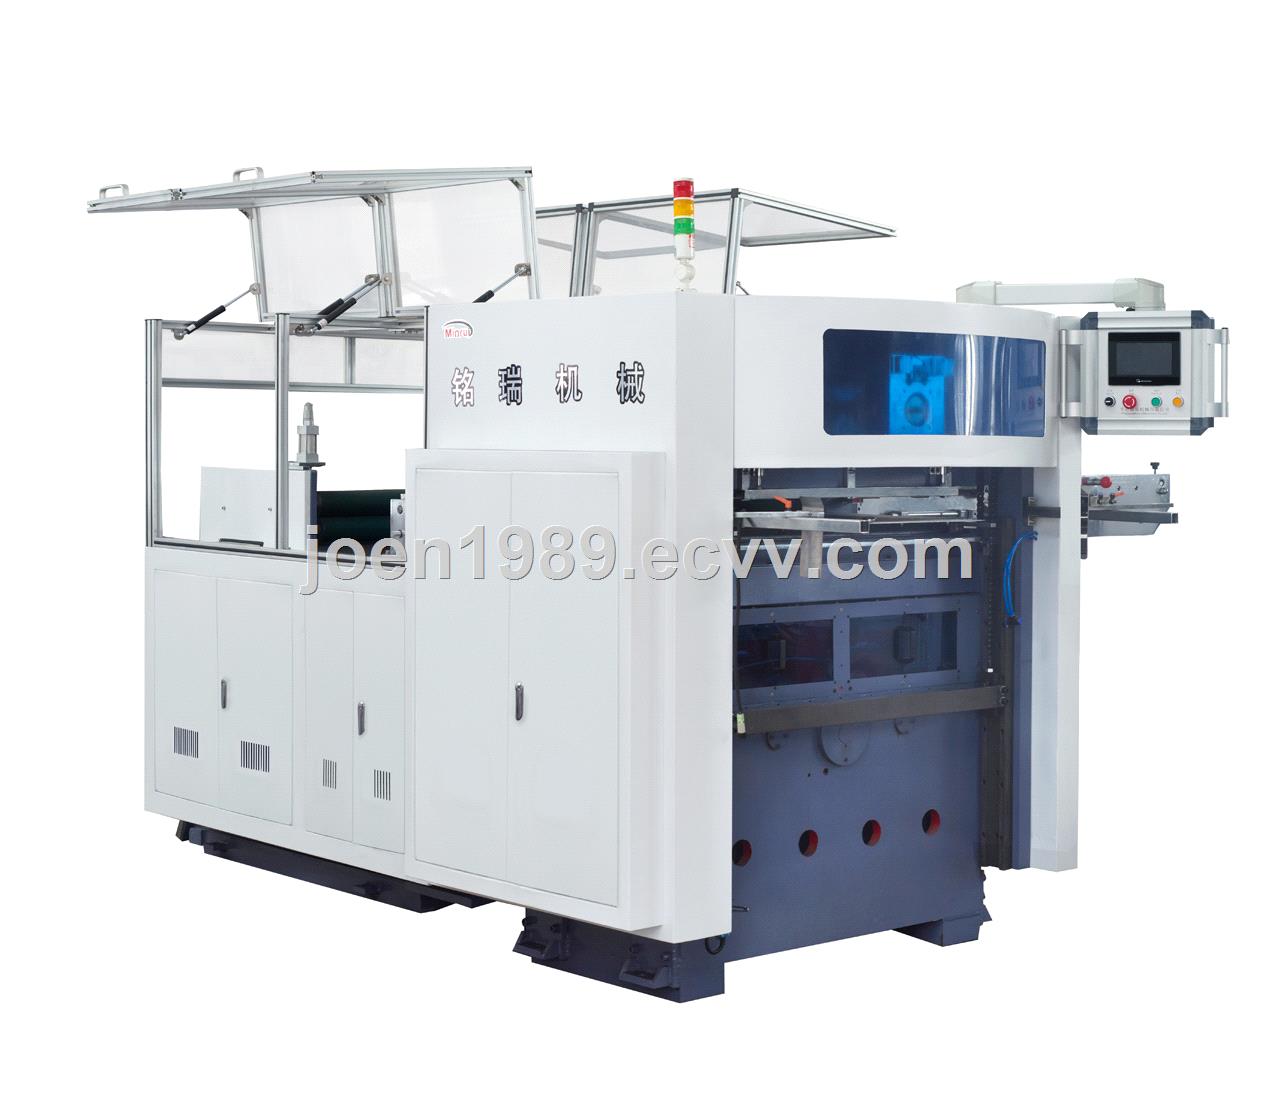 Full automatic roll paper cup wall die cutting machine MR930A